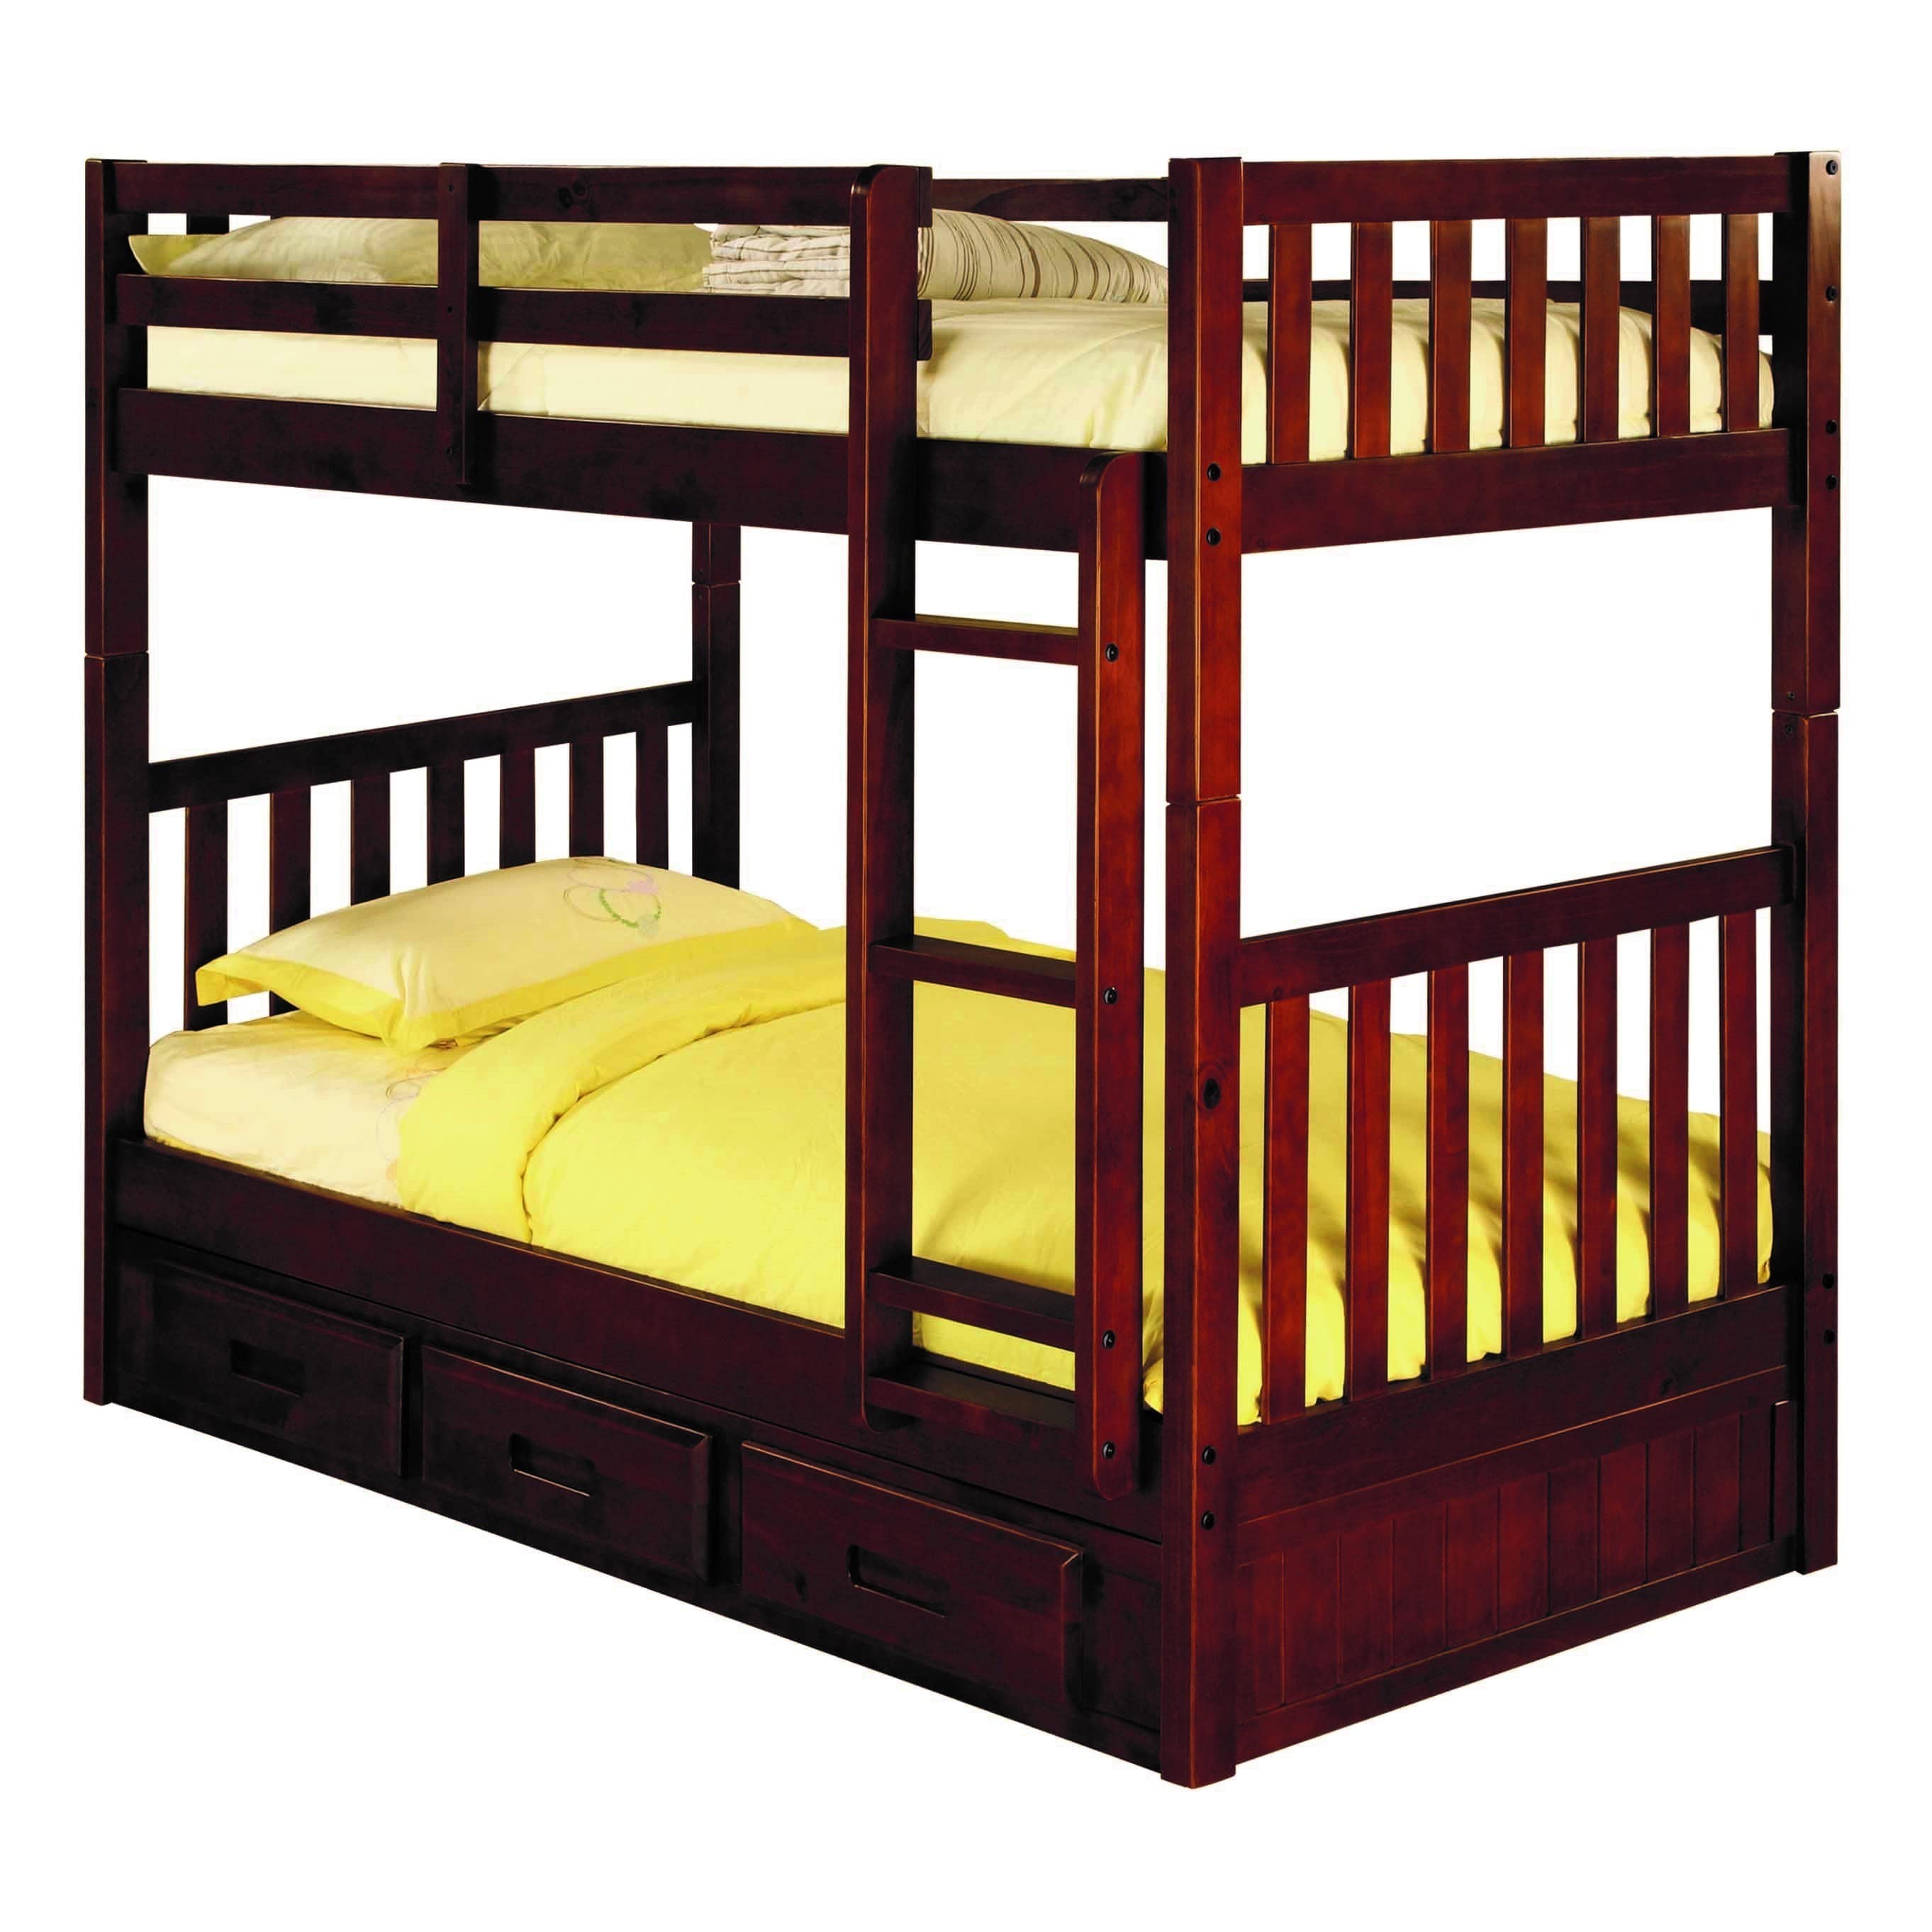 twin bunk beds that separate